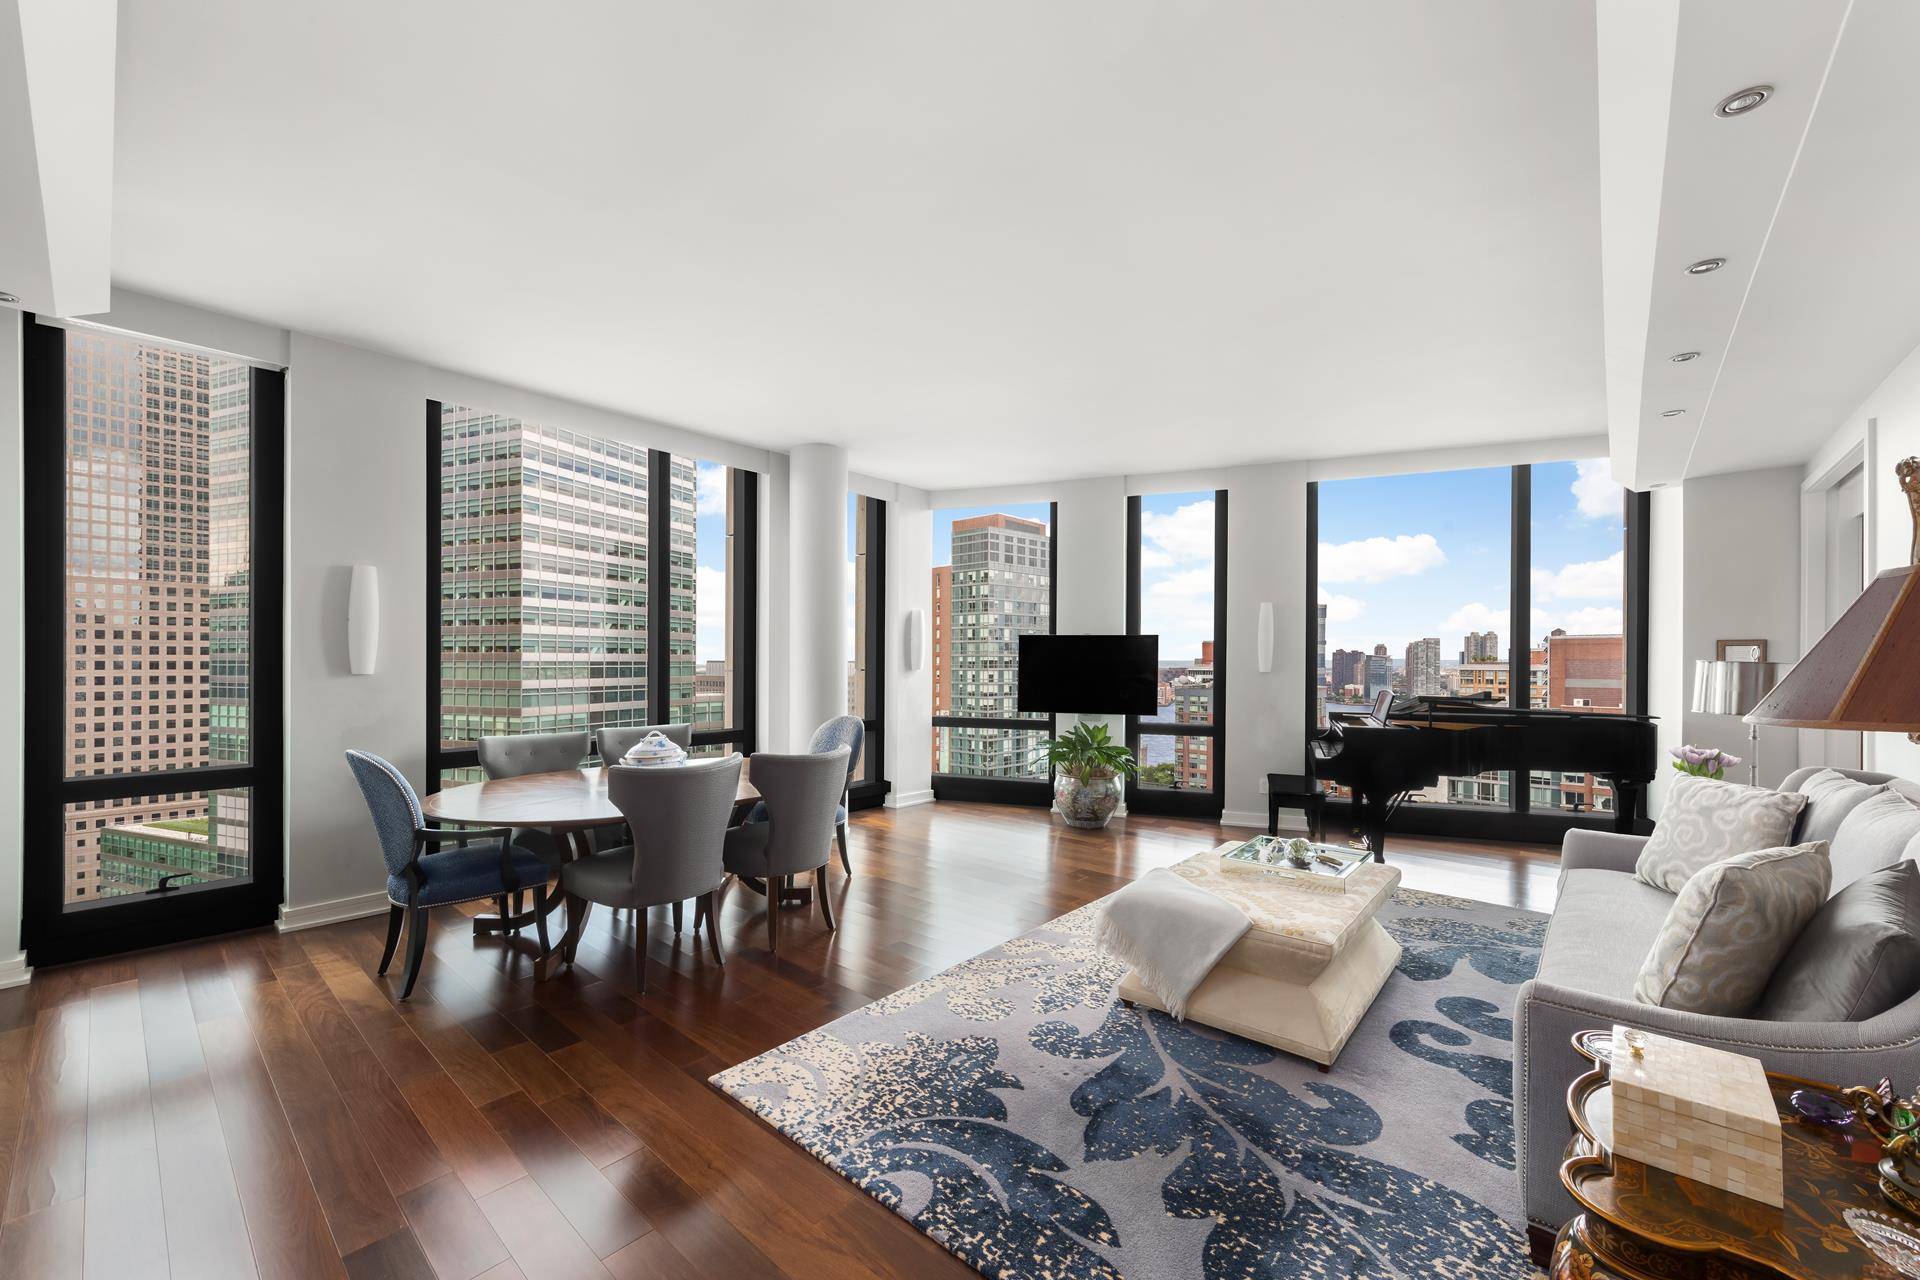 Located in Tribeca, NYC's most sought after neighborhood ; realize the dream of living well in this sleekly designed 3 bedroom 3.